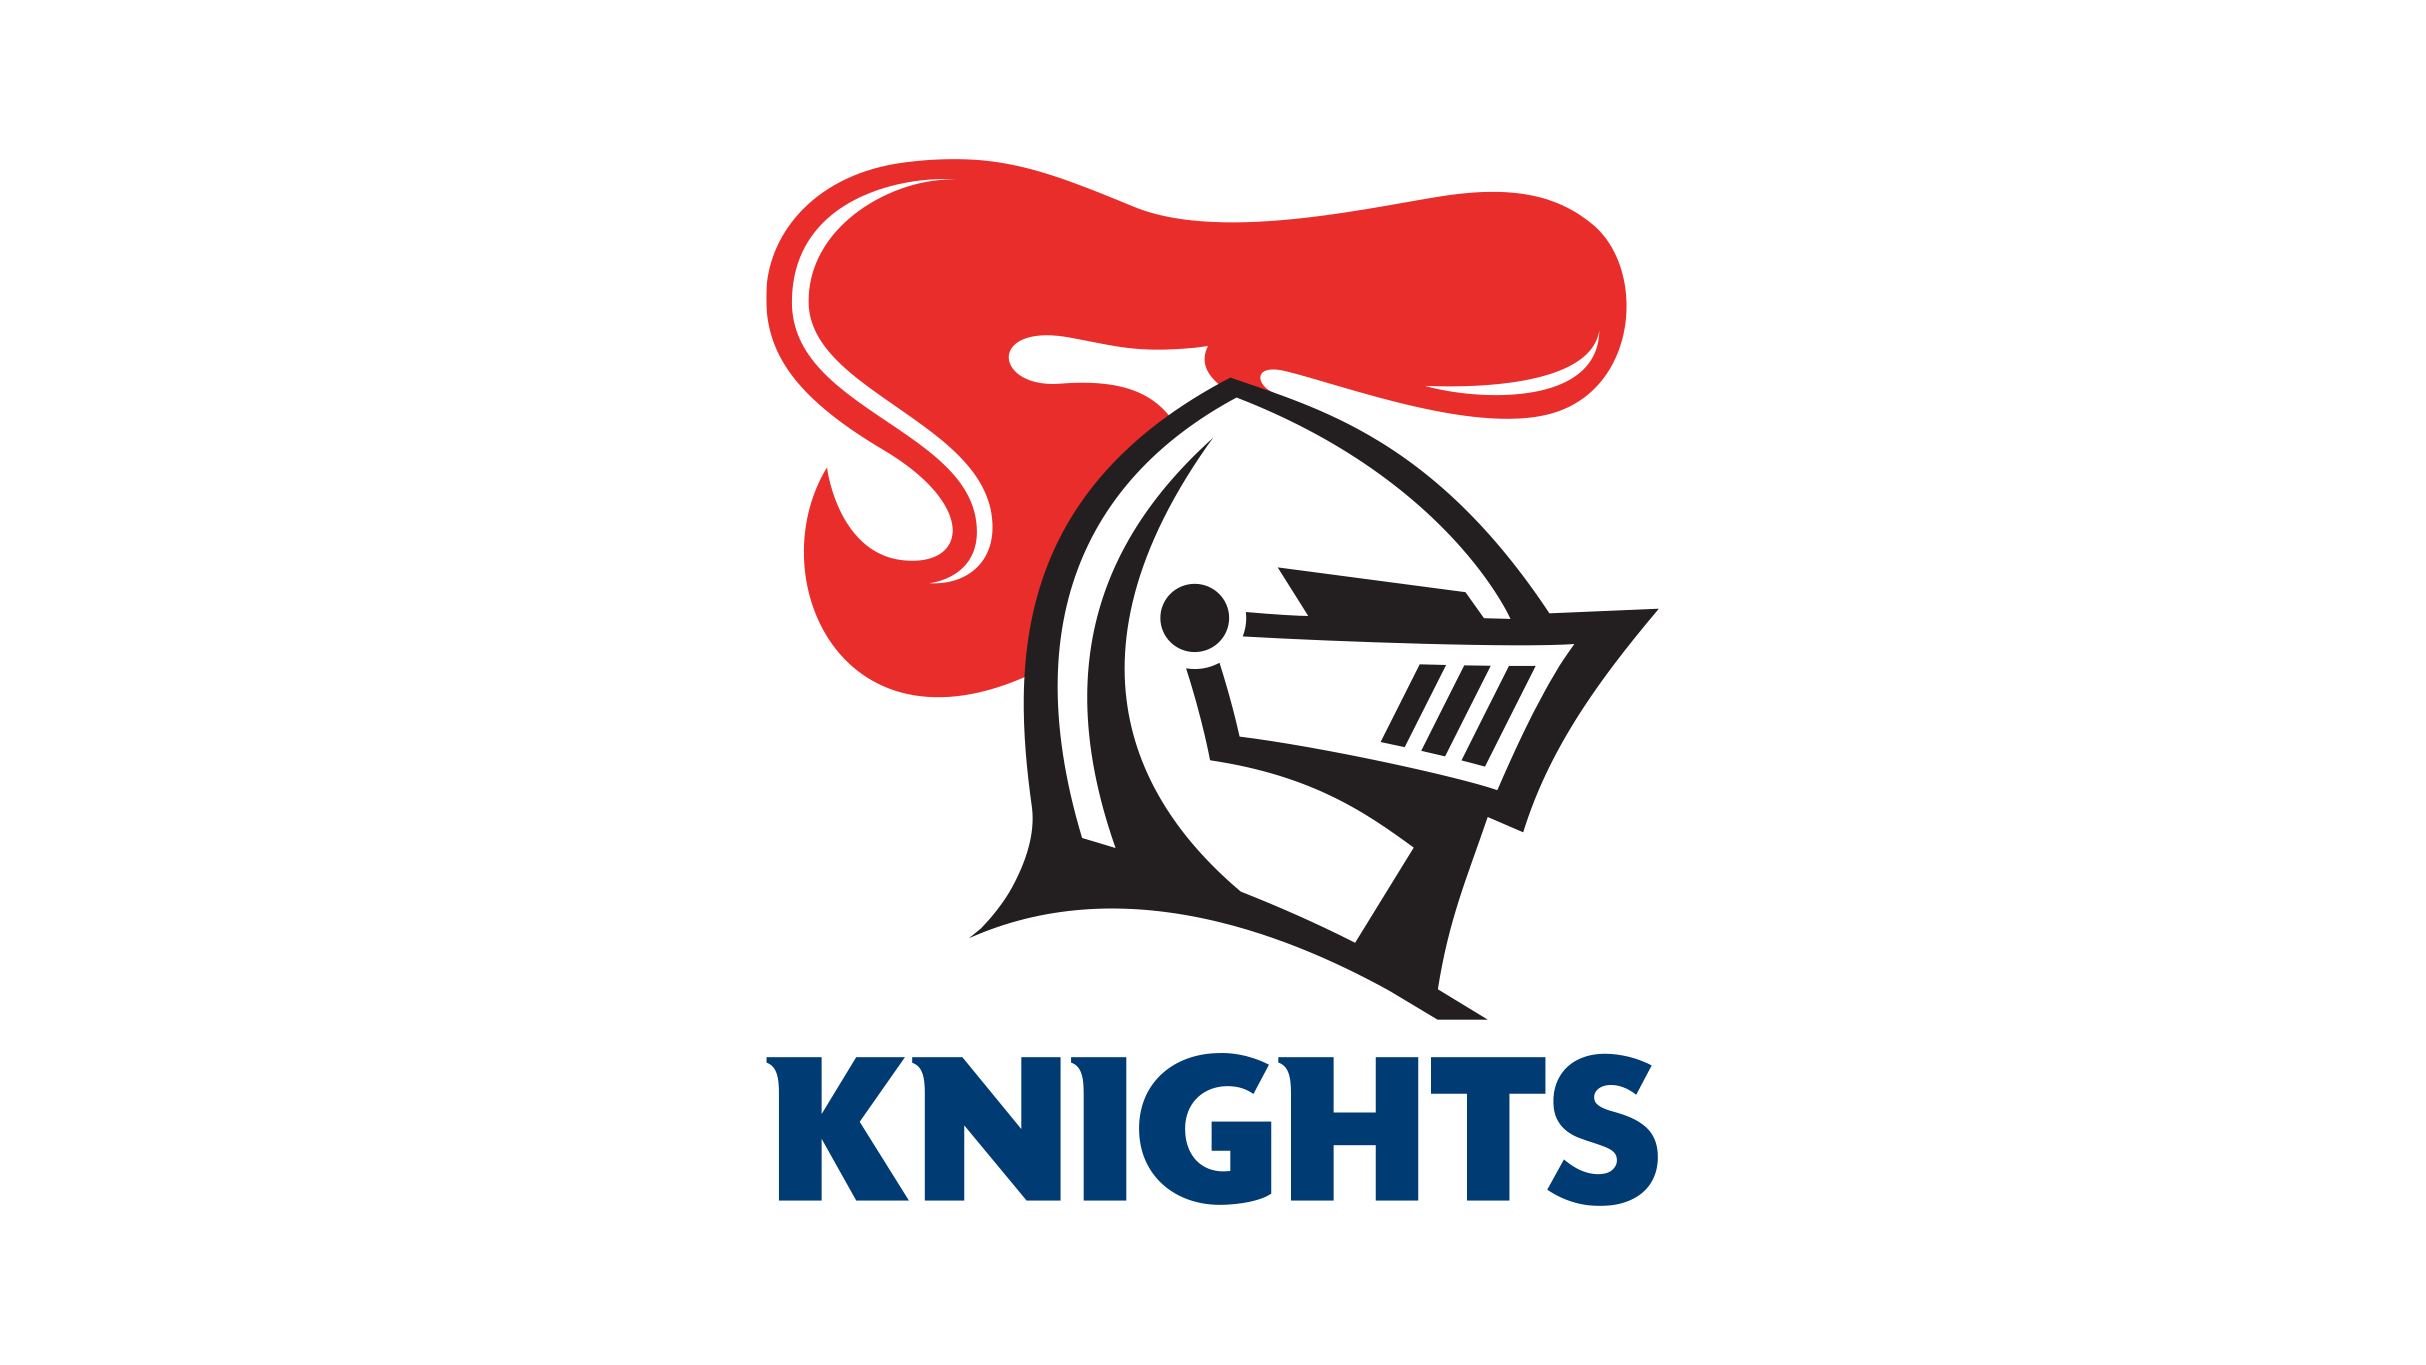 Newcastle Knights v Brisbane Broncos in Newcastle promo photo for Knights Members presale offer code